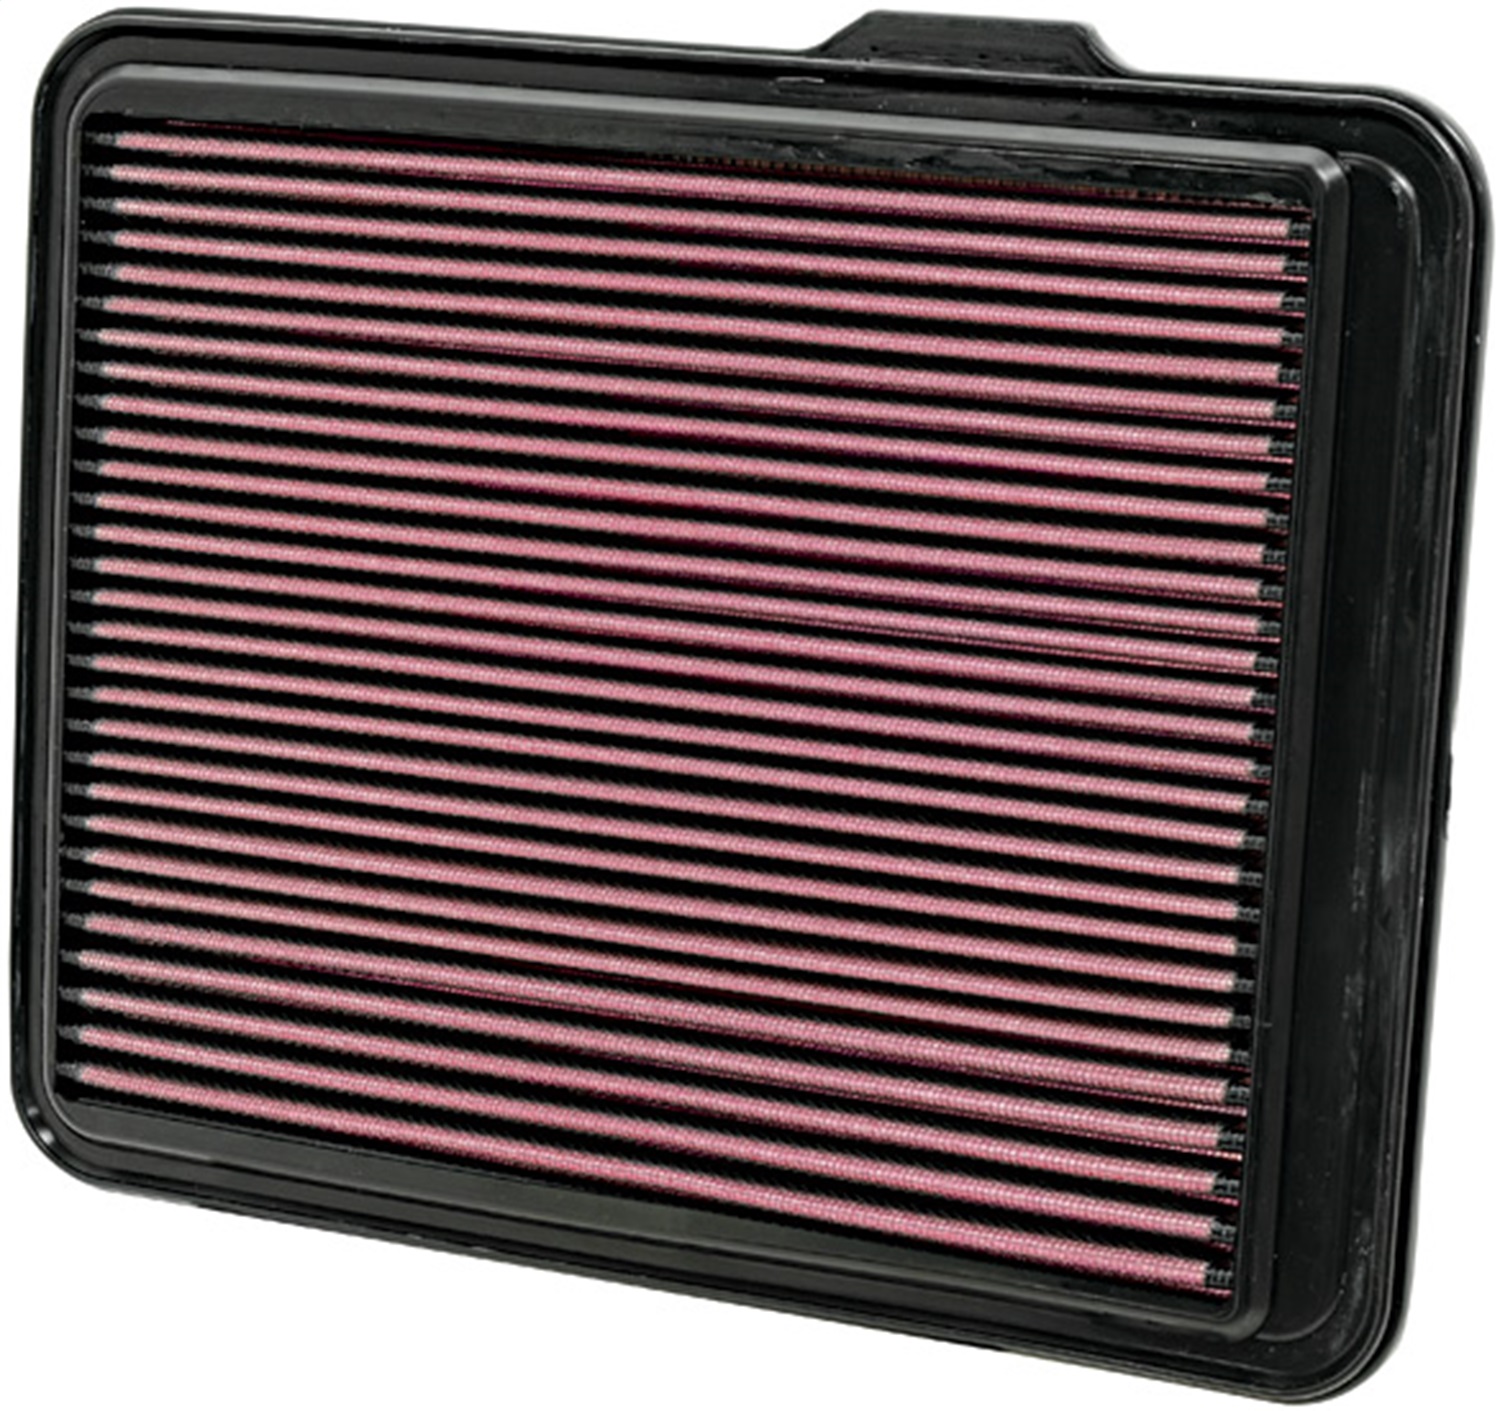 K&N Filters K&N Filters 33-2408 Air Filter Fits 08-12 Canyon Colorado H3 H3T